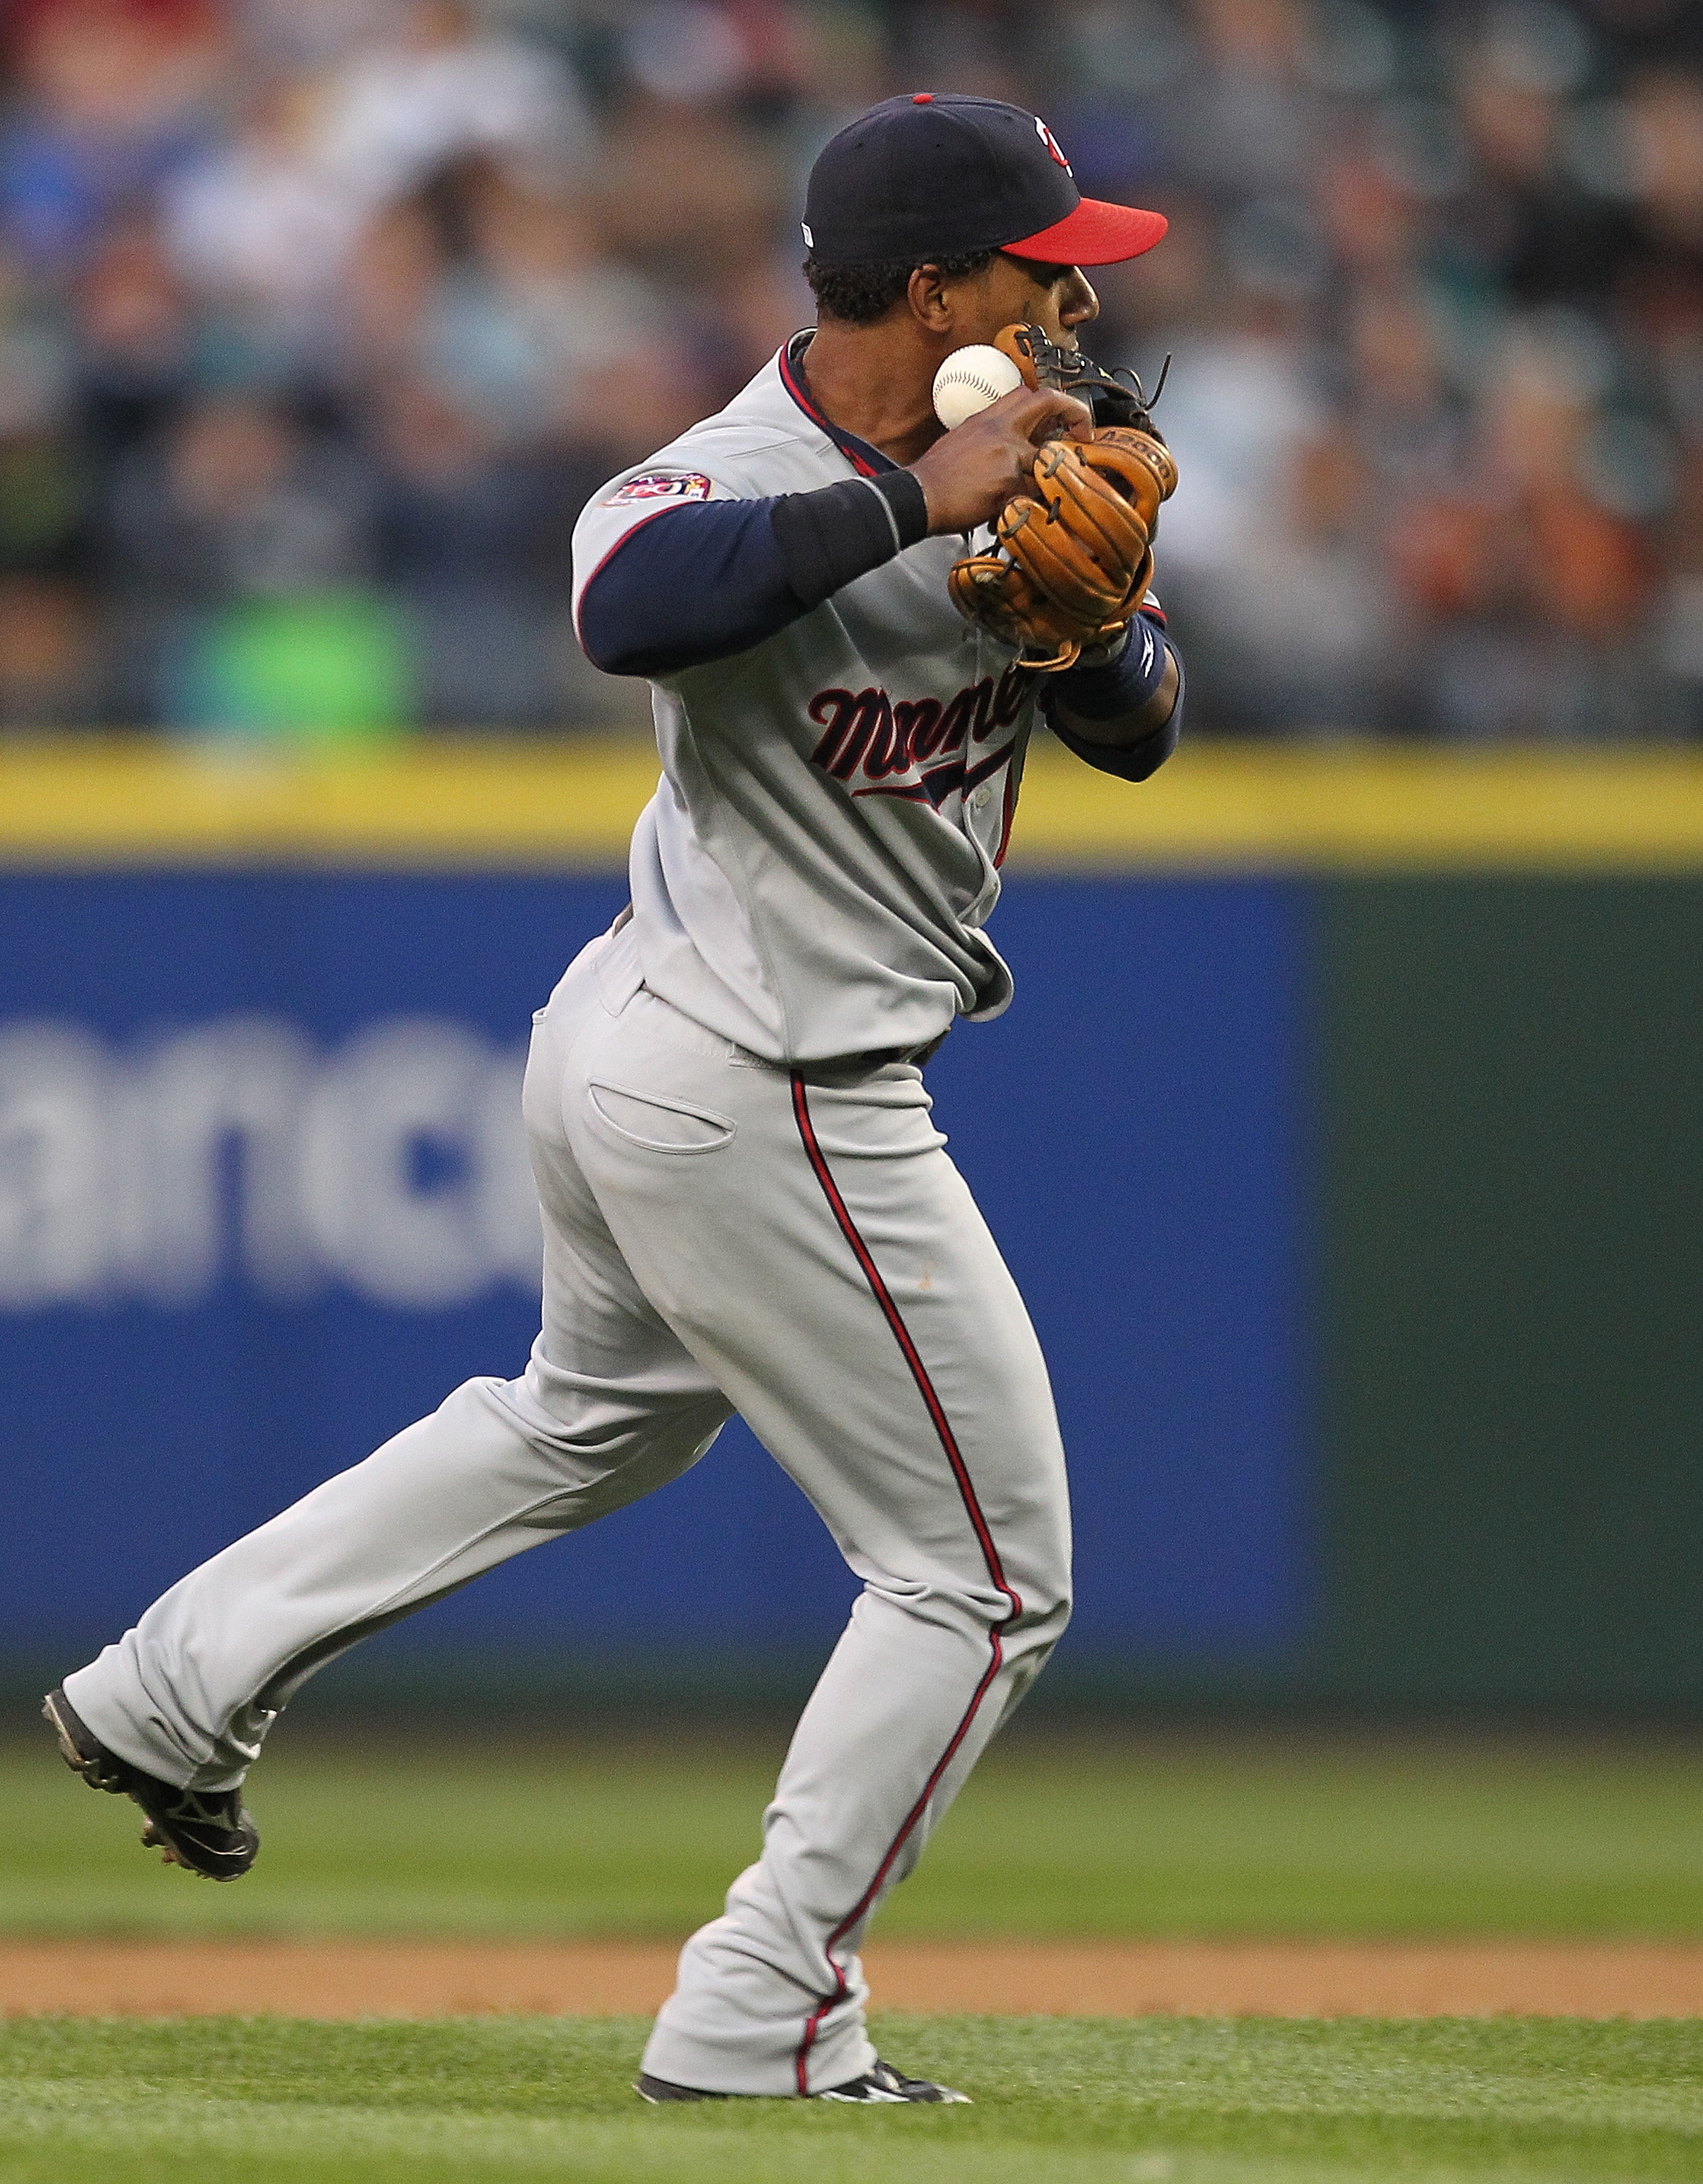 Liriano dominant as Twins beat Tigers 2-0